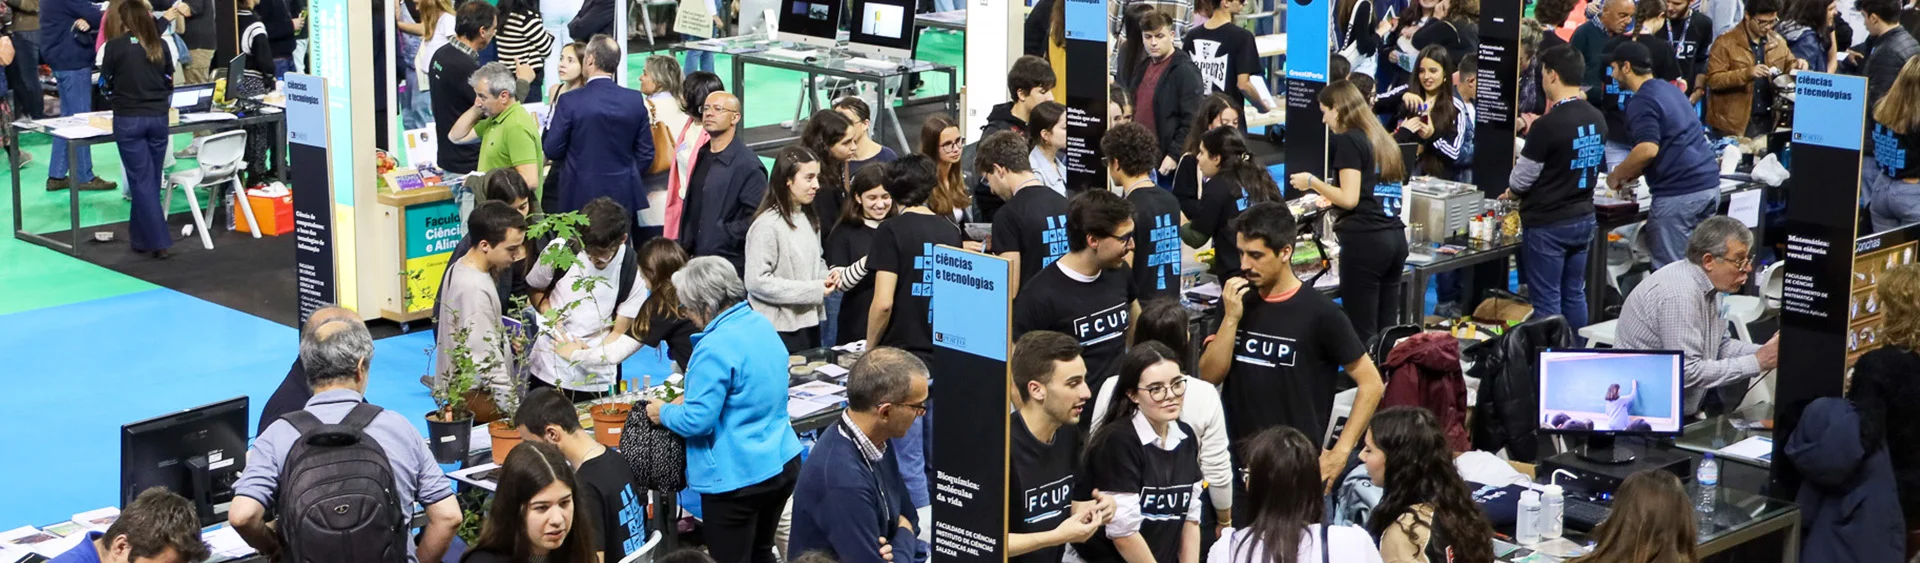 FCUP volunteers at the University of Porto Exhibition